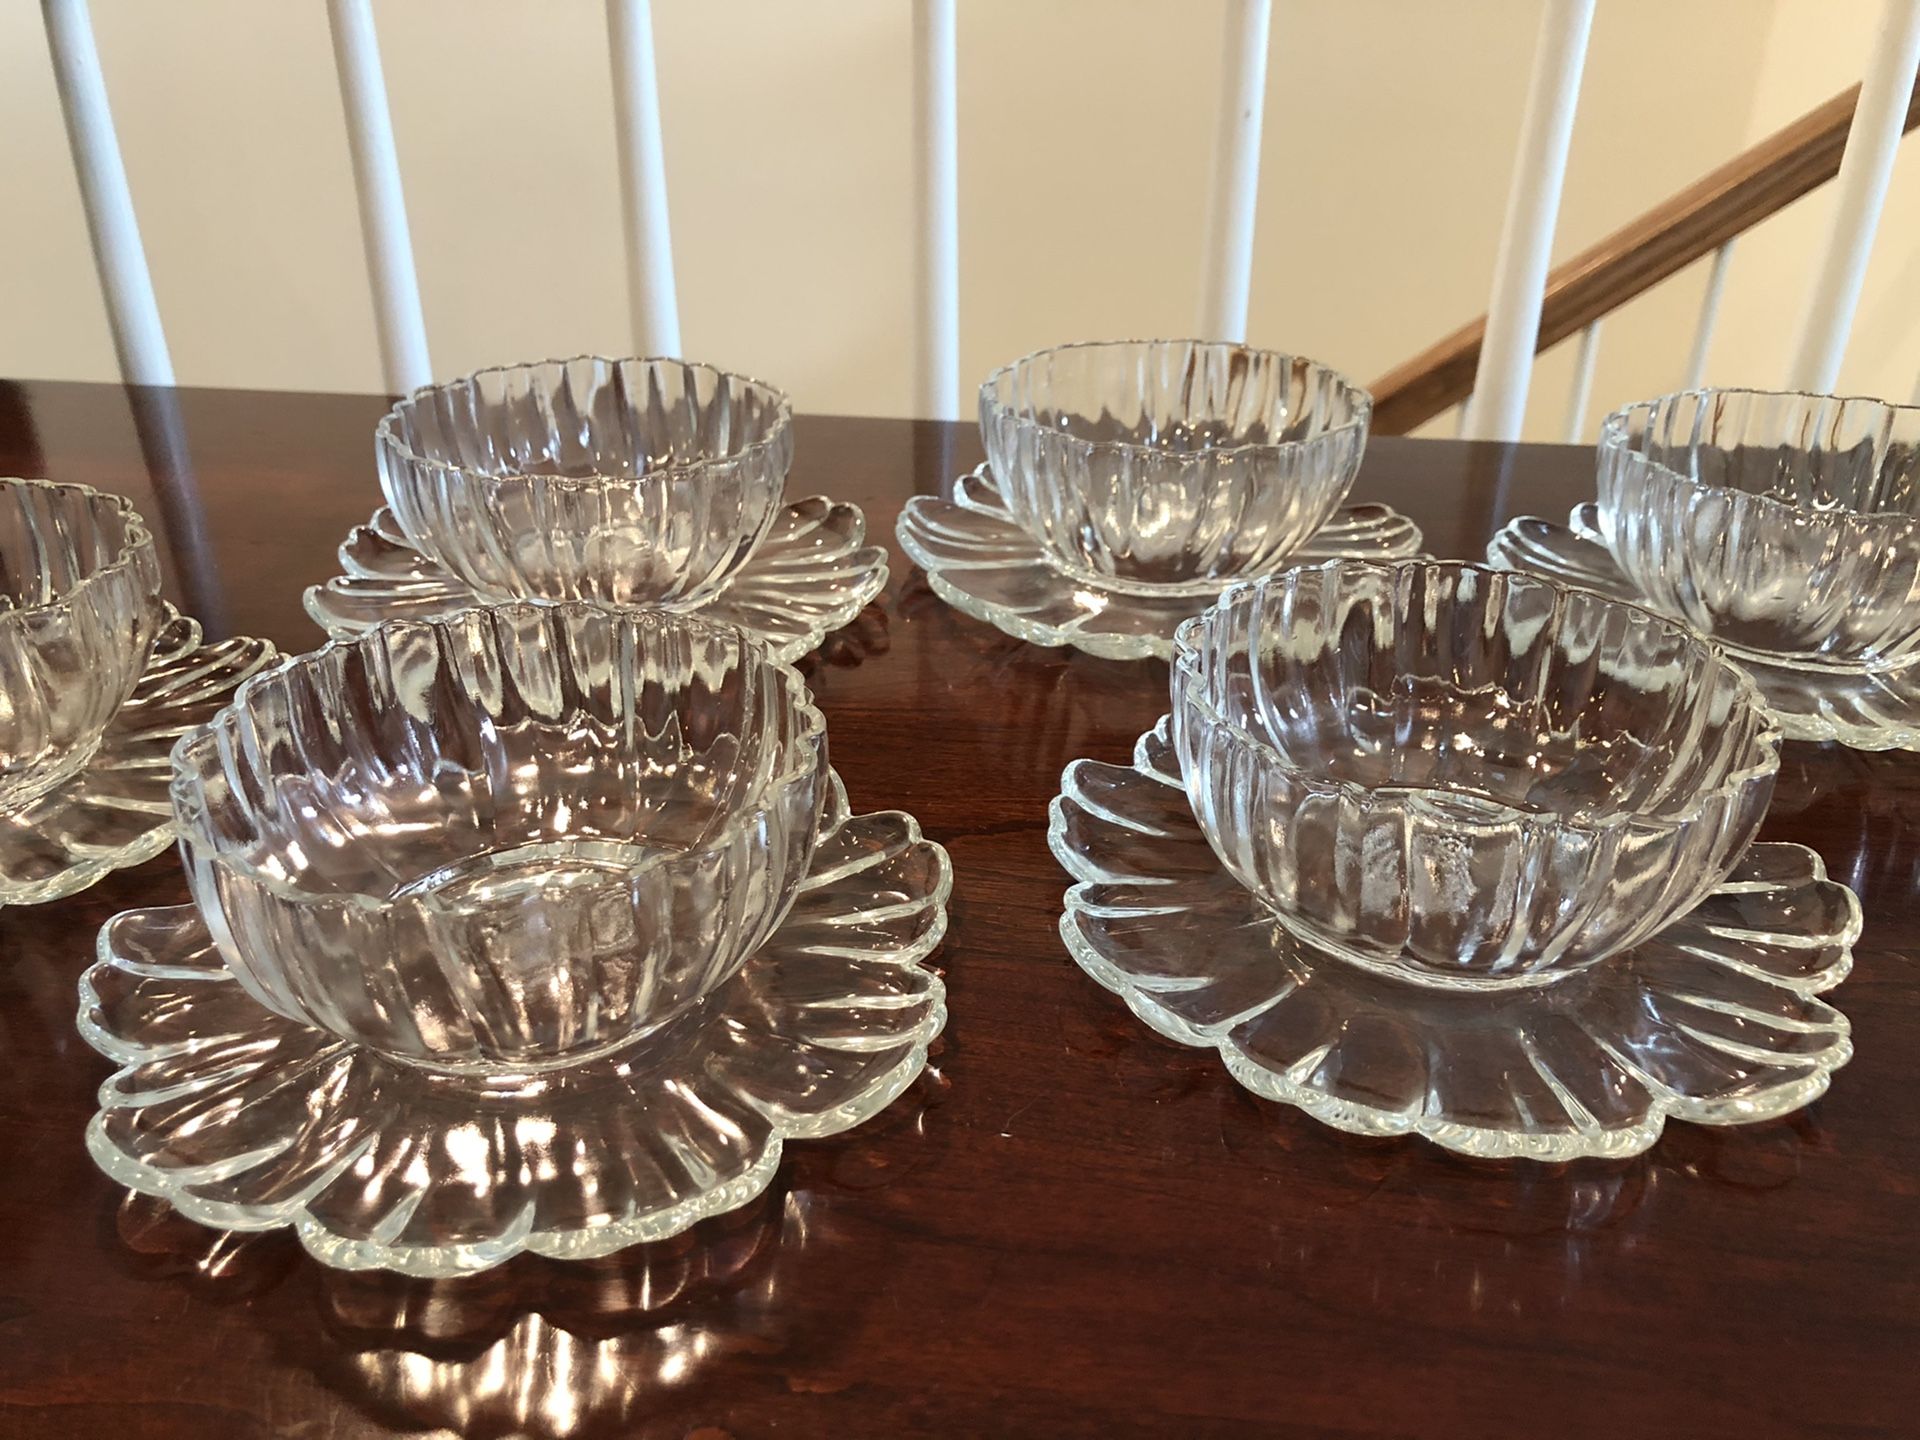 Get READY FOR SUMMER with this LIKE NEW SET OF 6 GLASS ICE CREAM BOWLS!